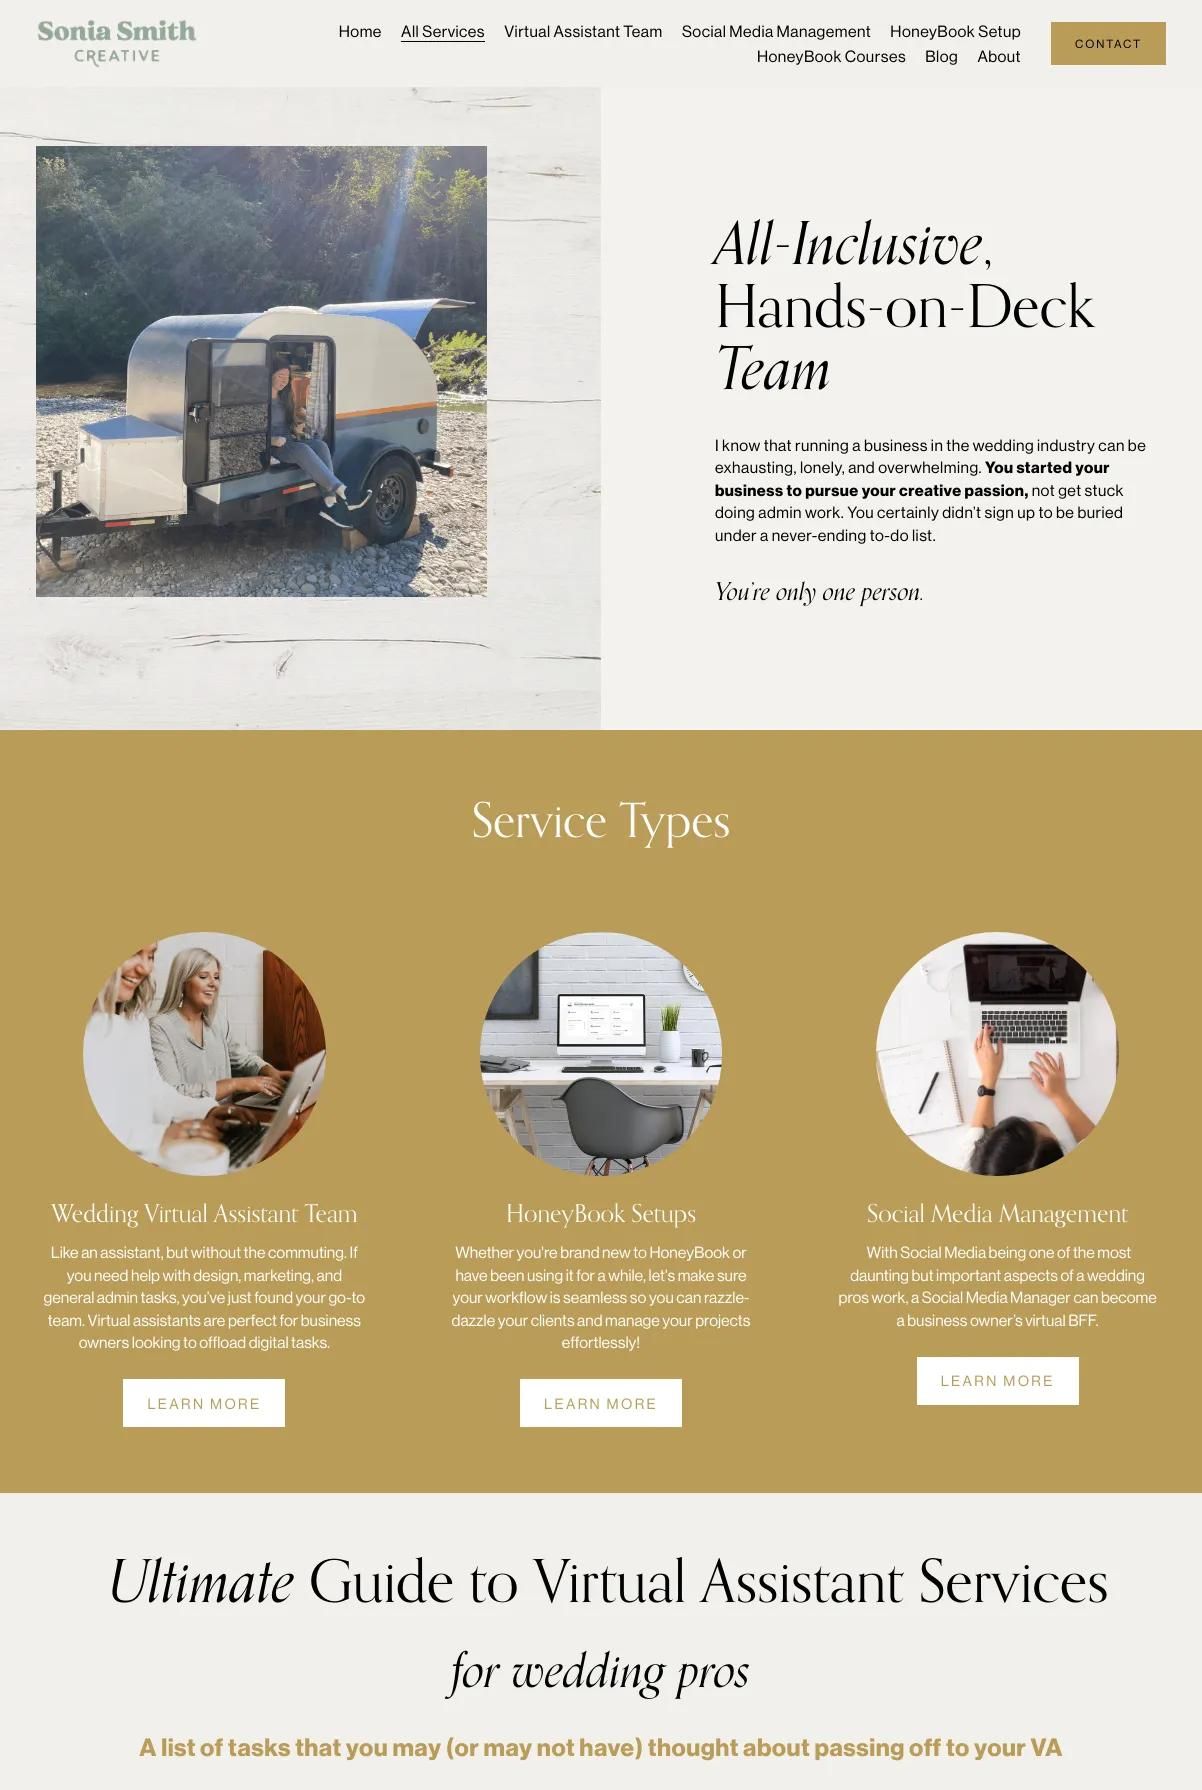 Screenshot 2 of Sonia Smith Creative (Example Squarespace Virtual Assistant Website)